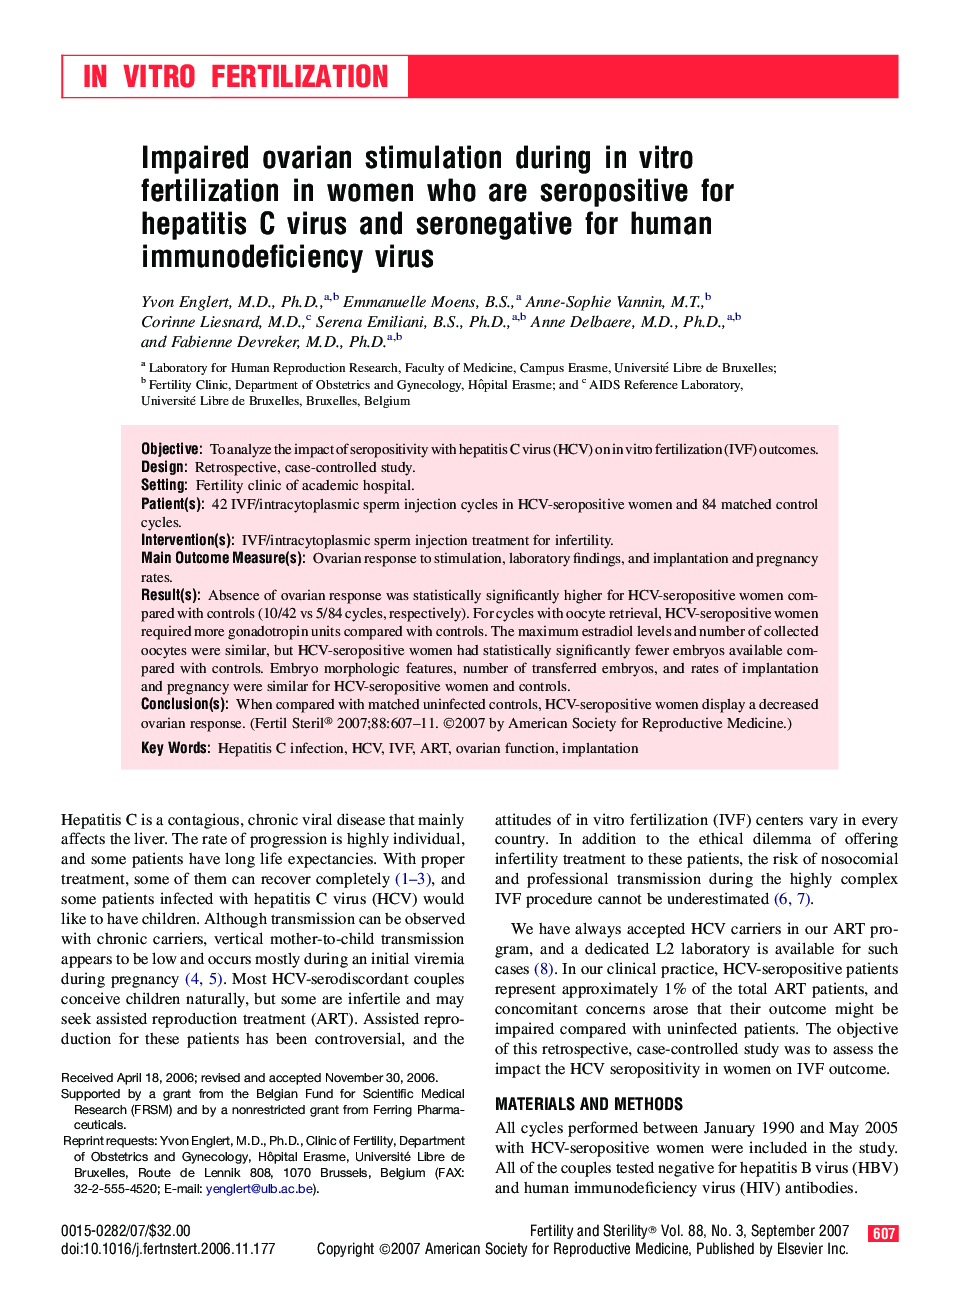 Impaired ovarian stimulation during in vitro fertilization in women who are seropositive for hepatitis C virus and seronegative for human immunodeficiency virus 